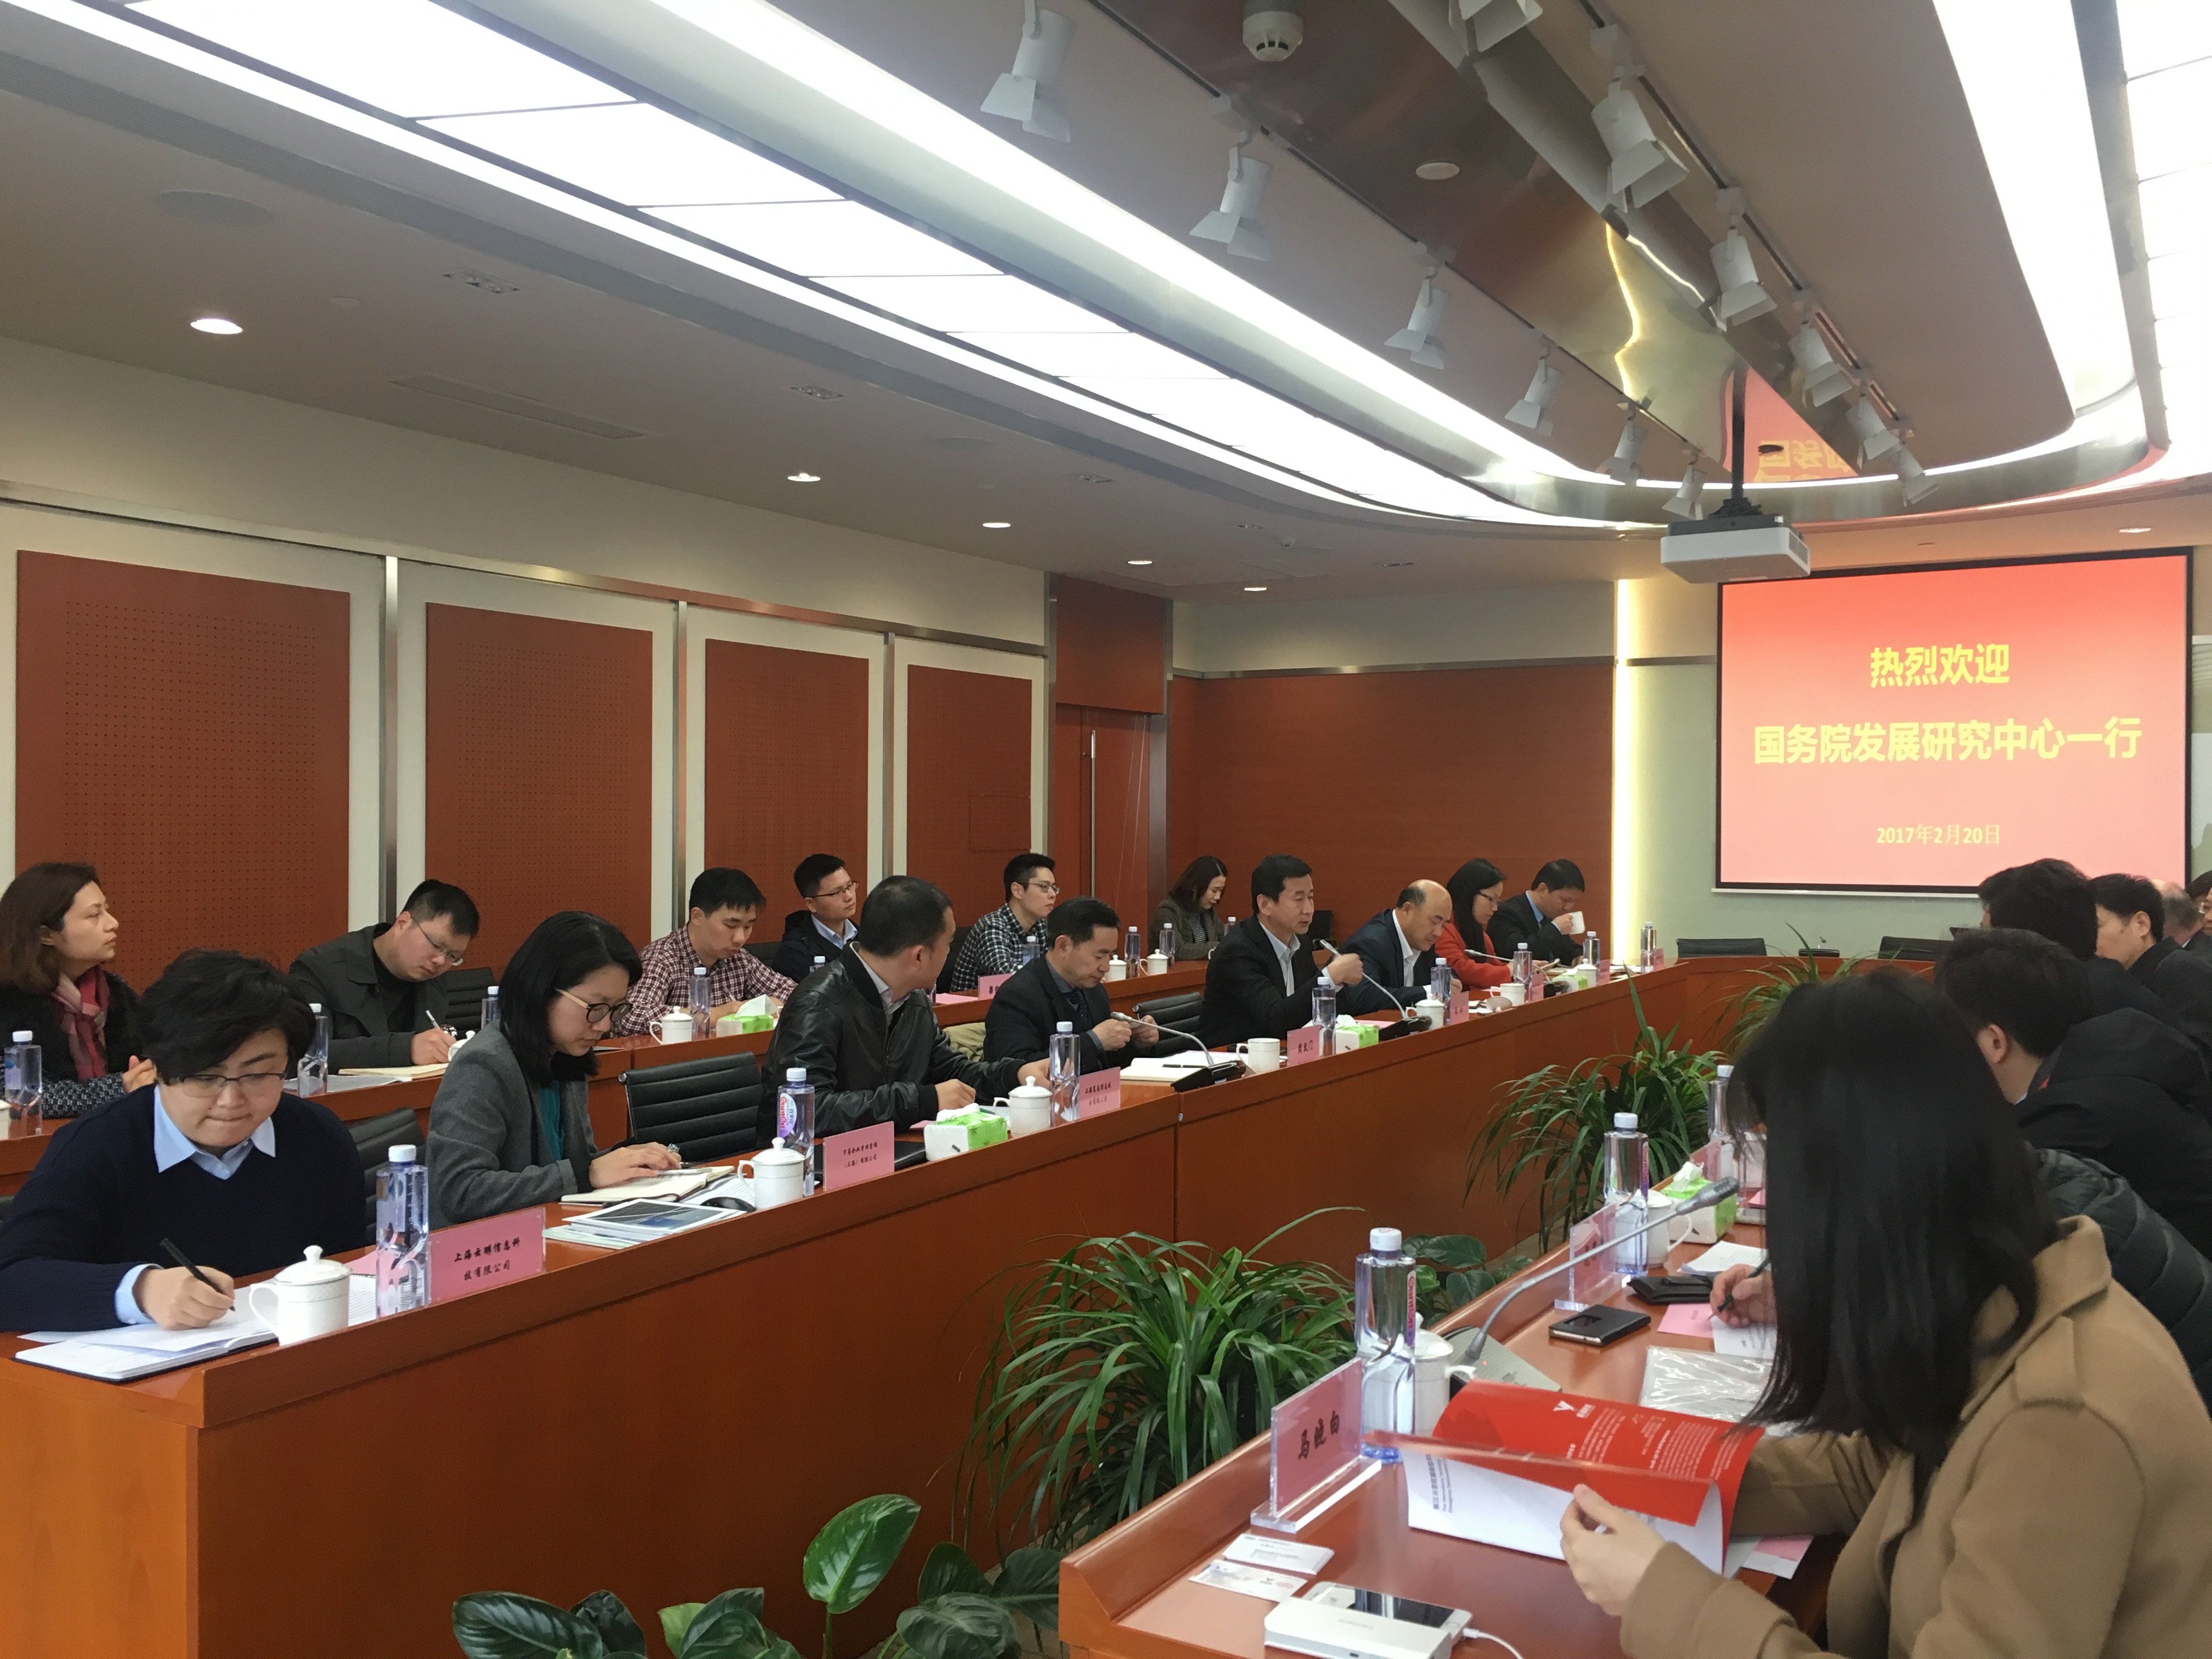 Zhang Junkuo leads survey group to Shanghai